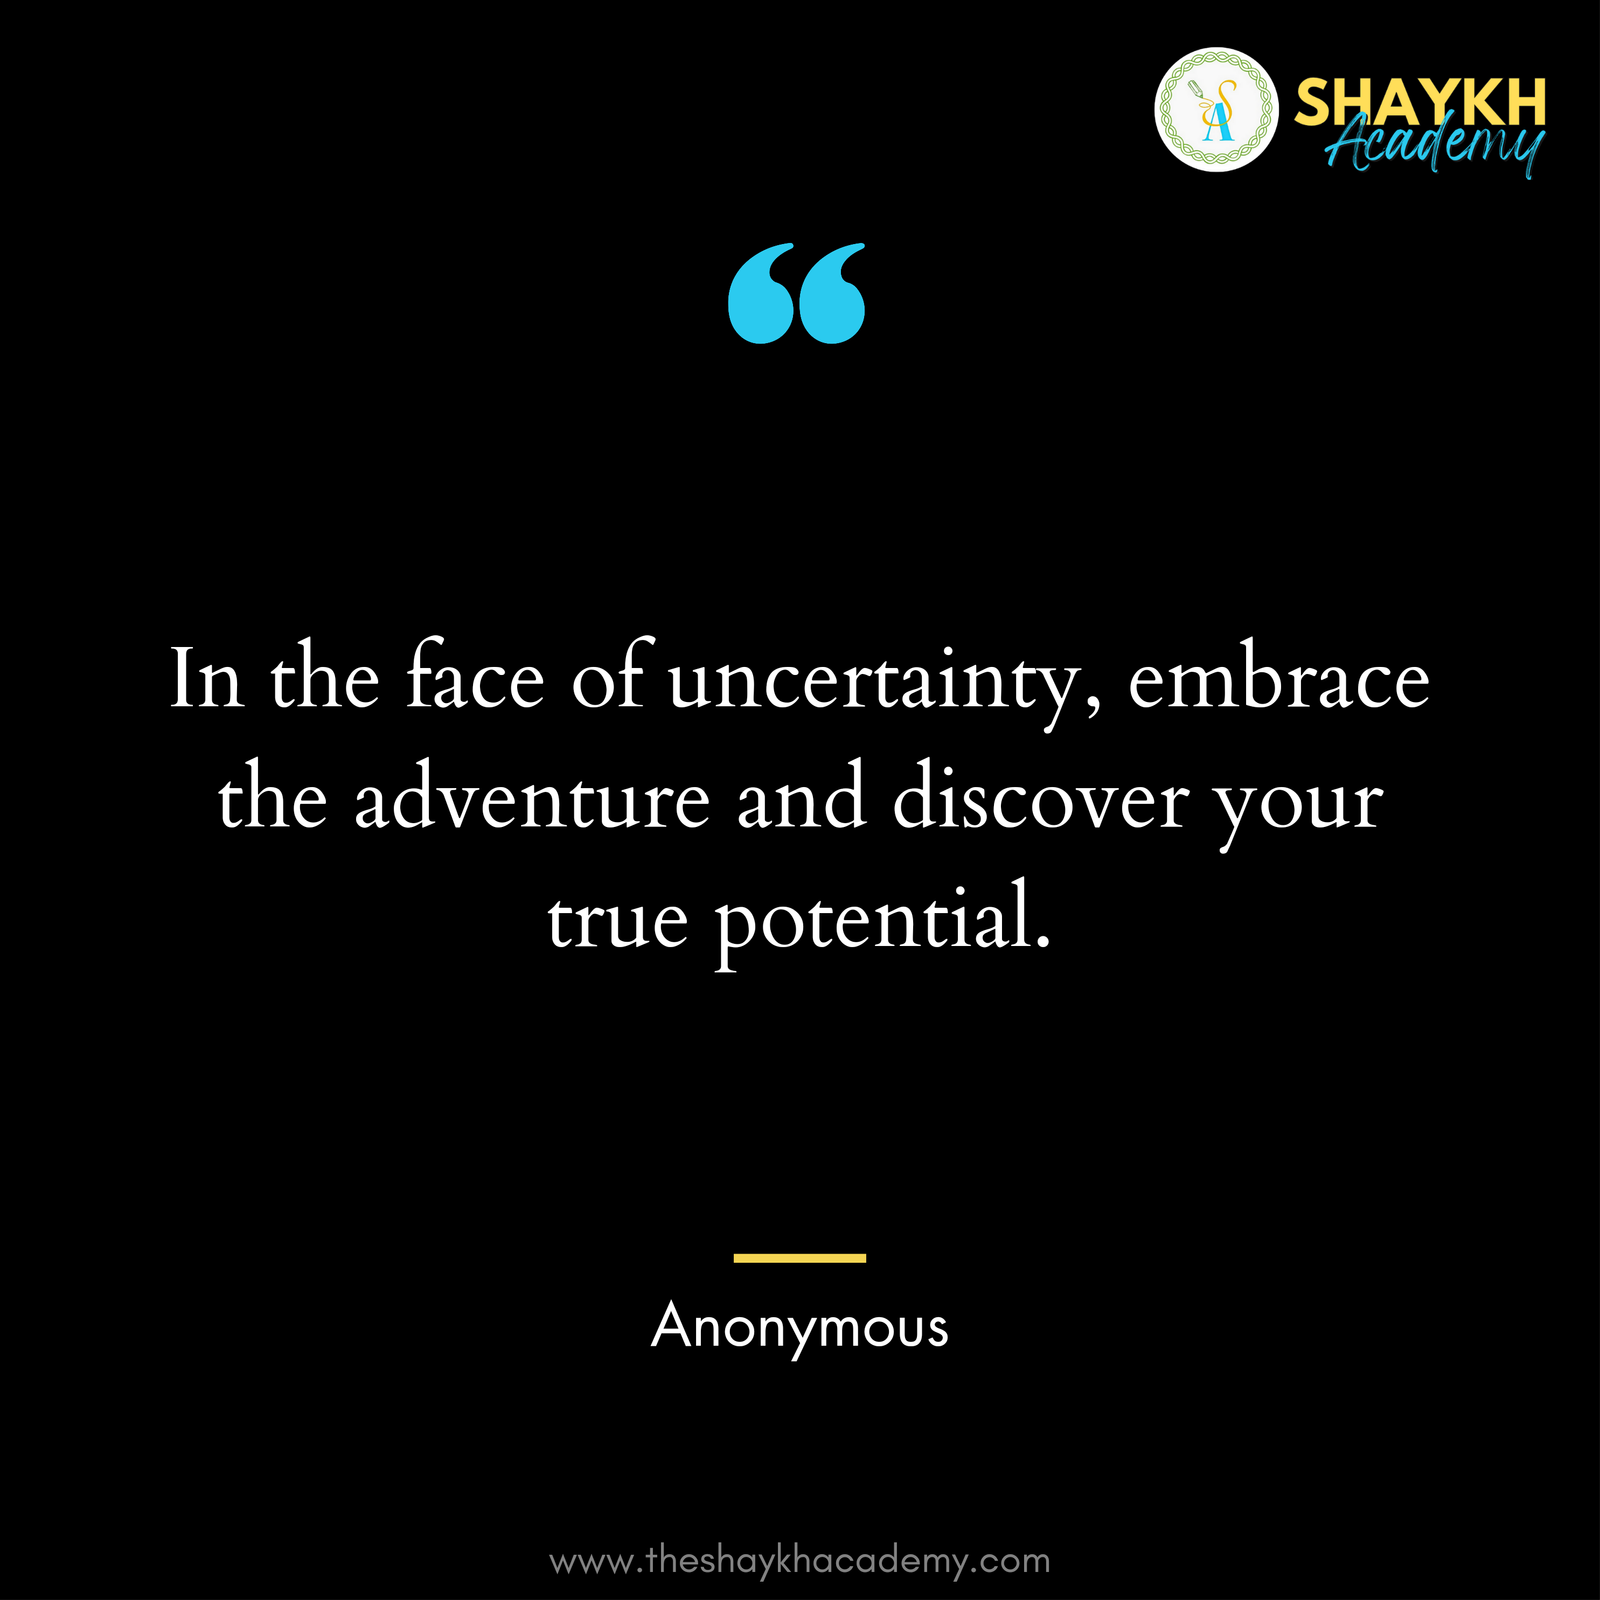 In the face of uncertainty, embrace the adventure and discover your true potential.